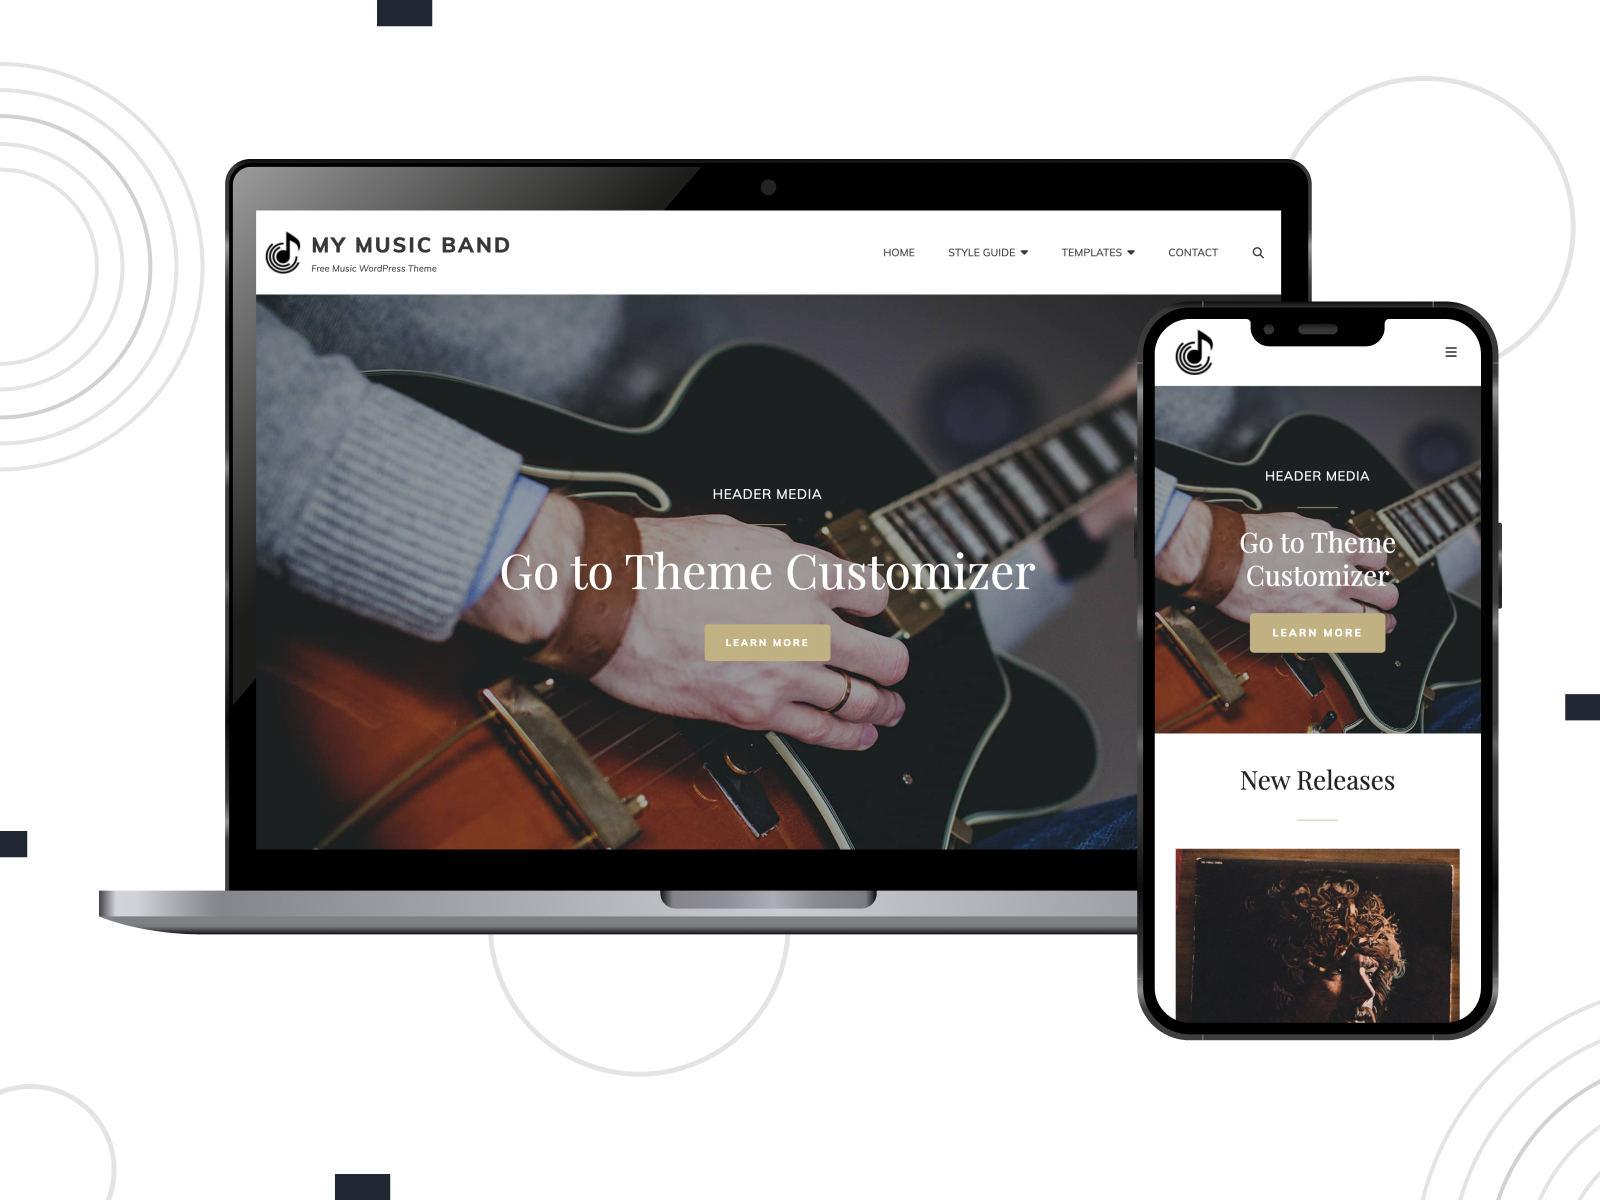 Figure of My Music Band, a free music band WordPress theme with a featured page slider.